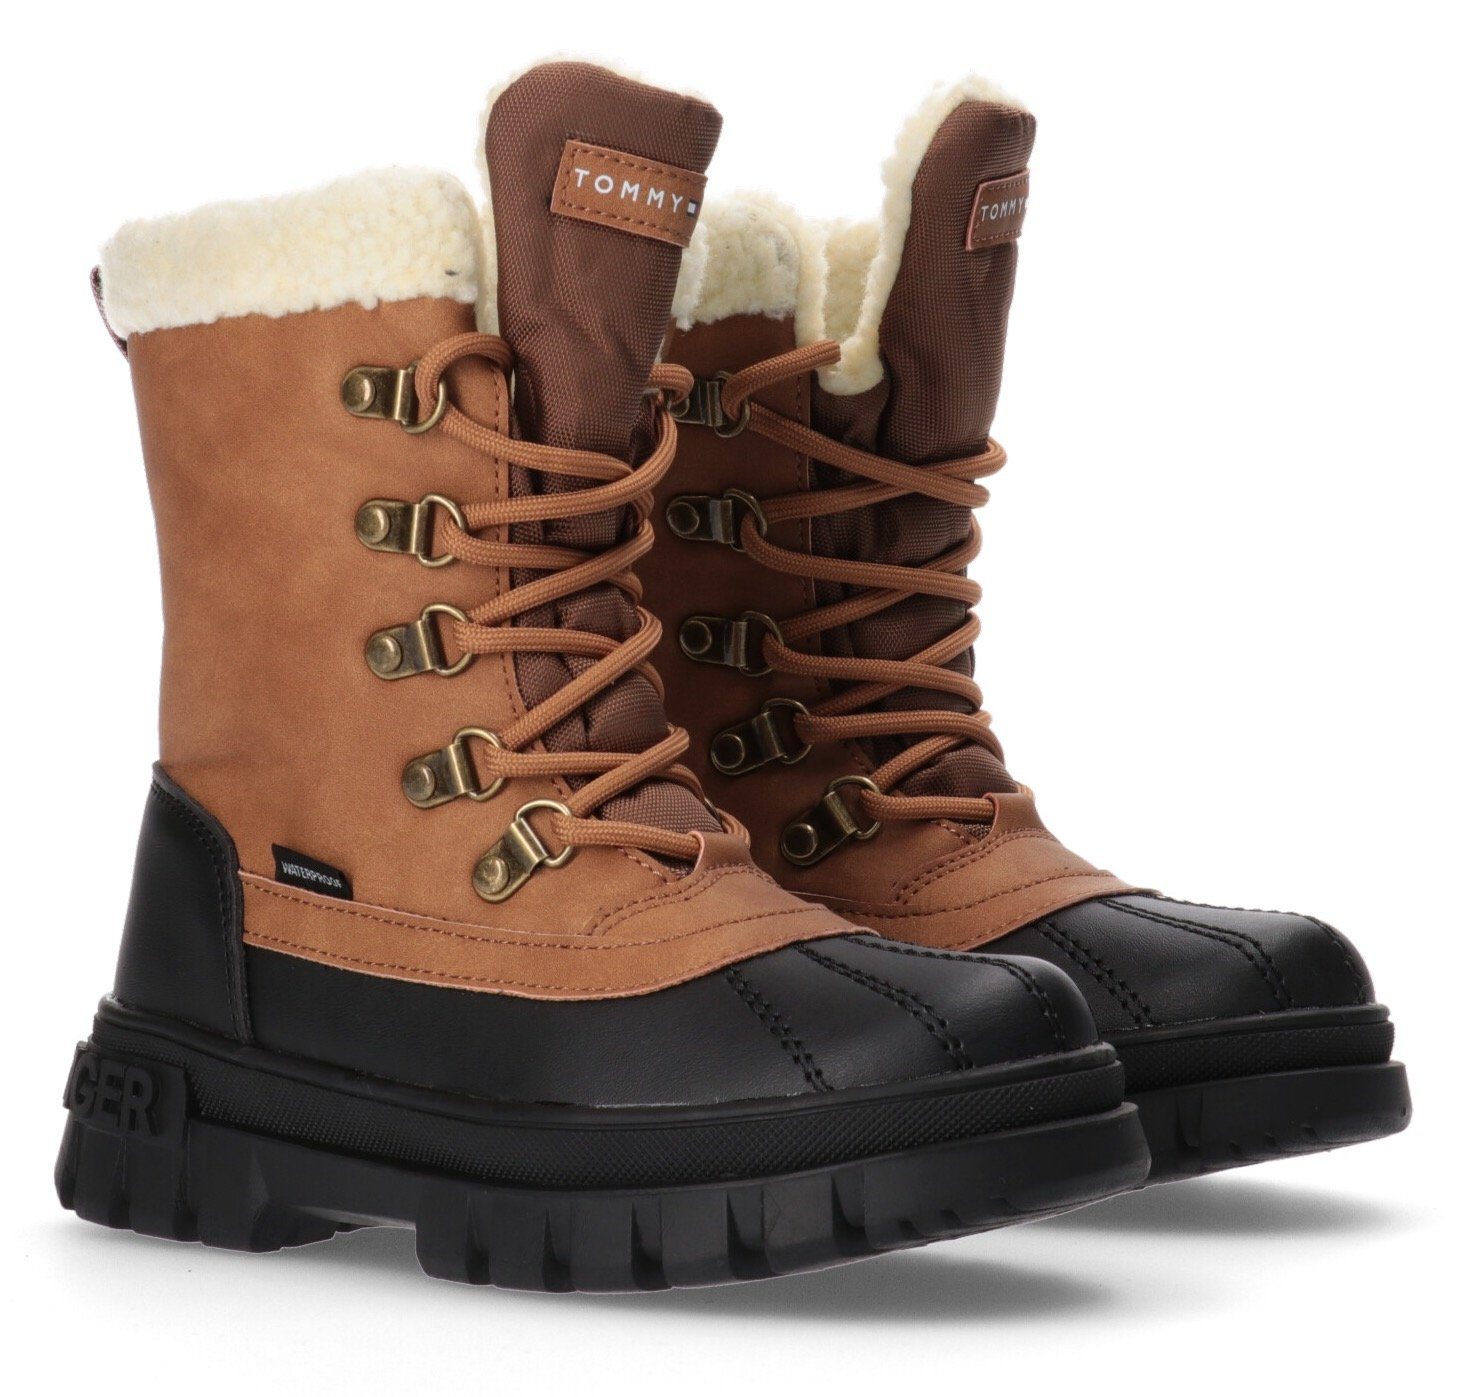 Hilfiger Tommy Snowboots Warmfutter Thermostiefel LACE-UP mit BOOT